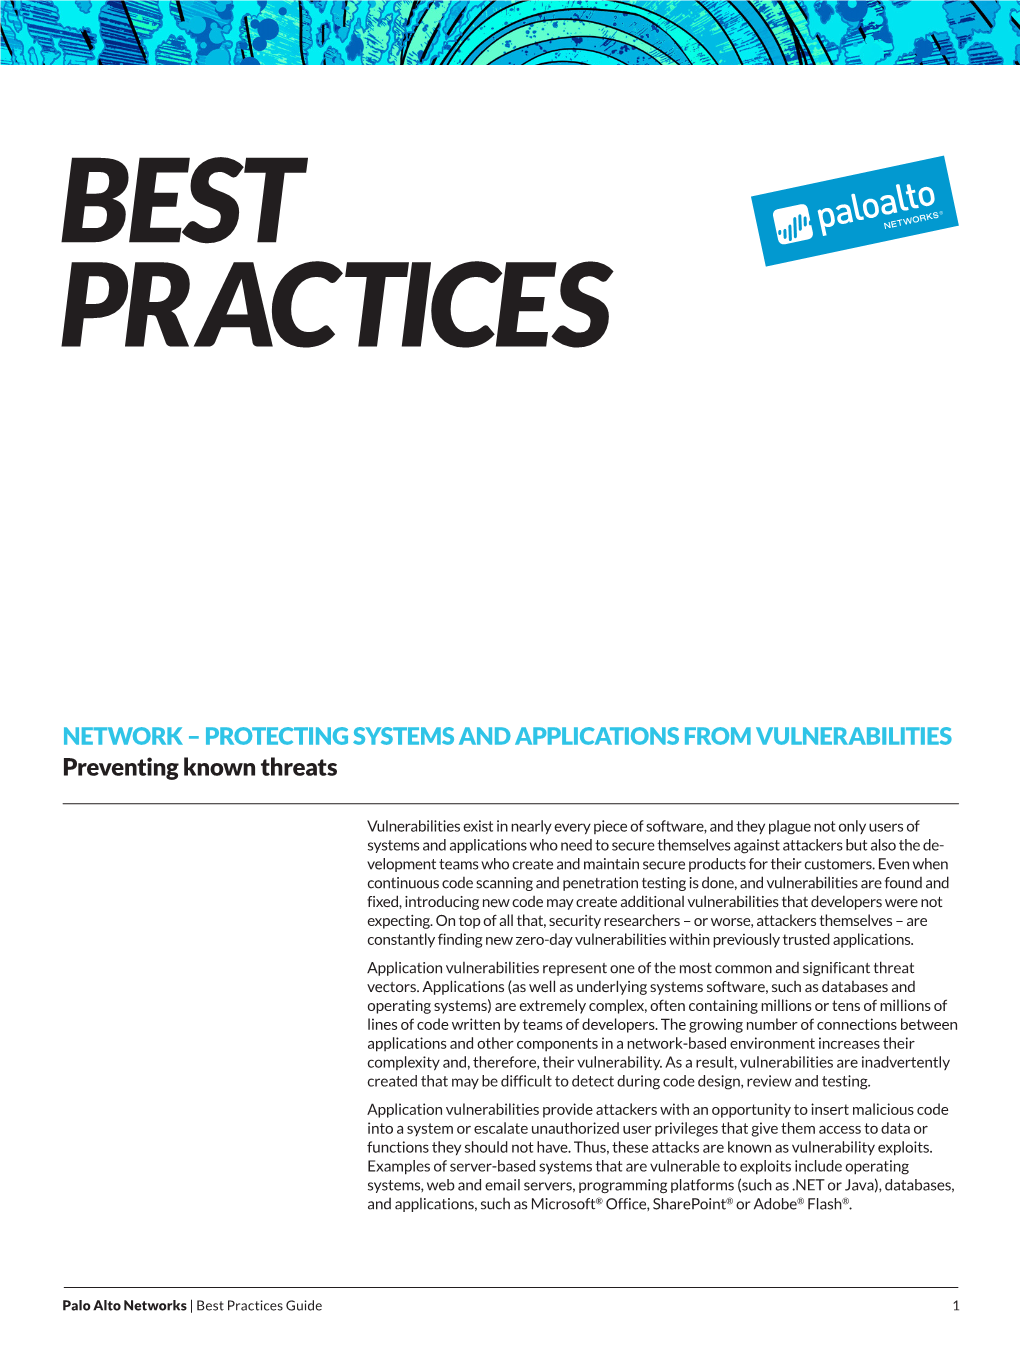 Best Practices: Protecting Vulnerable Systems